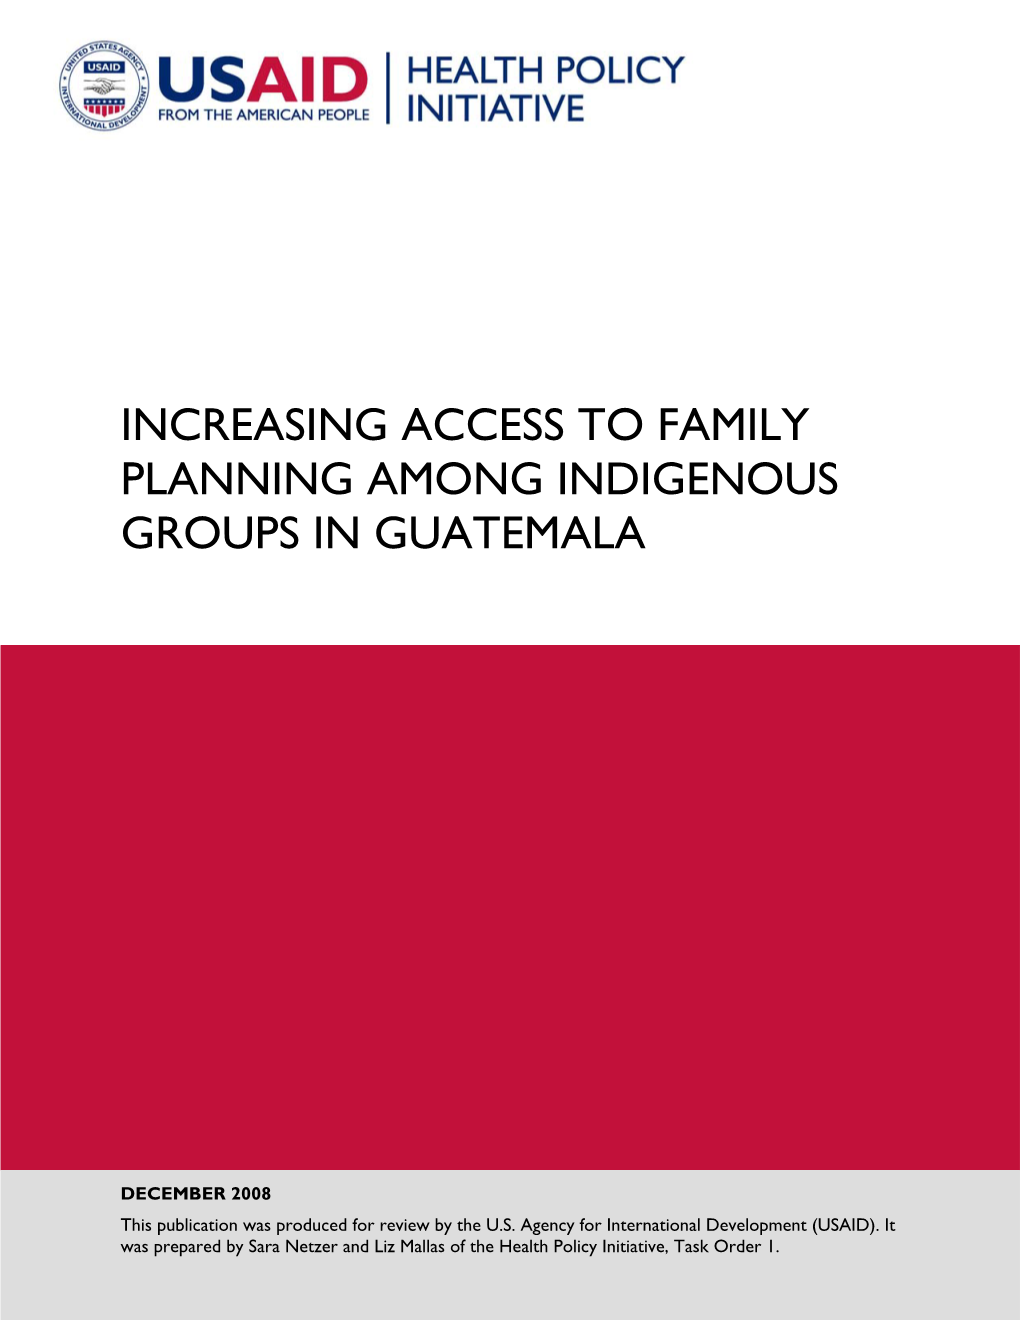 Increasing Access to Family Planning Among Indigenous Groups in Guatemala